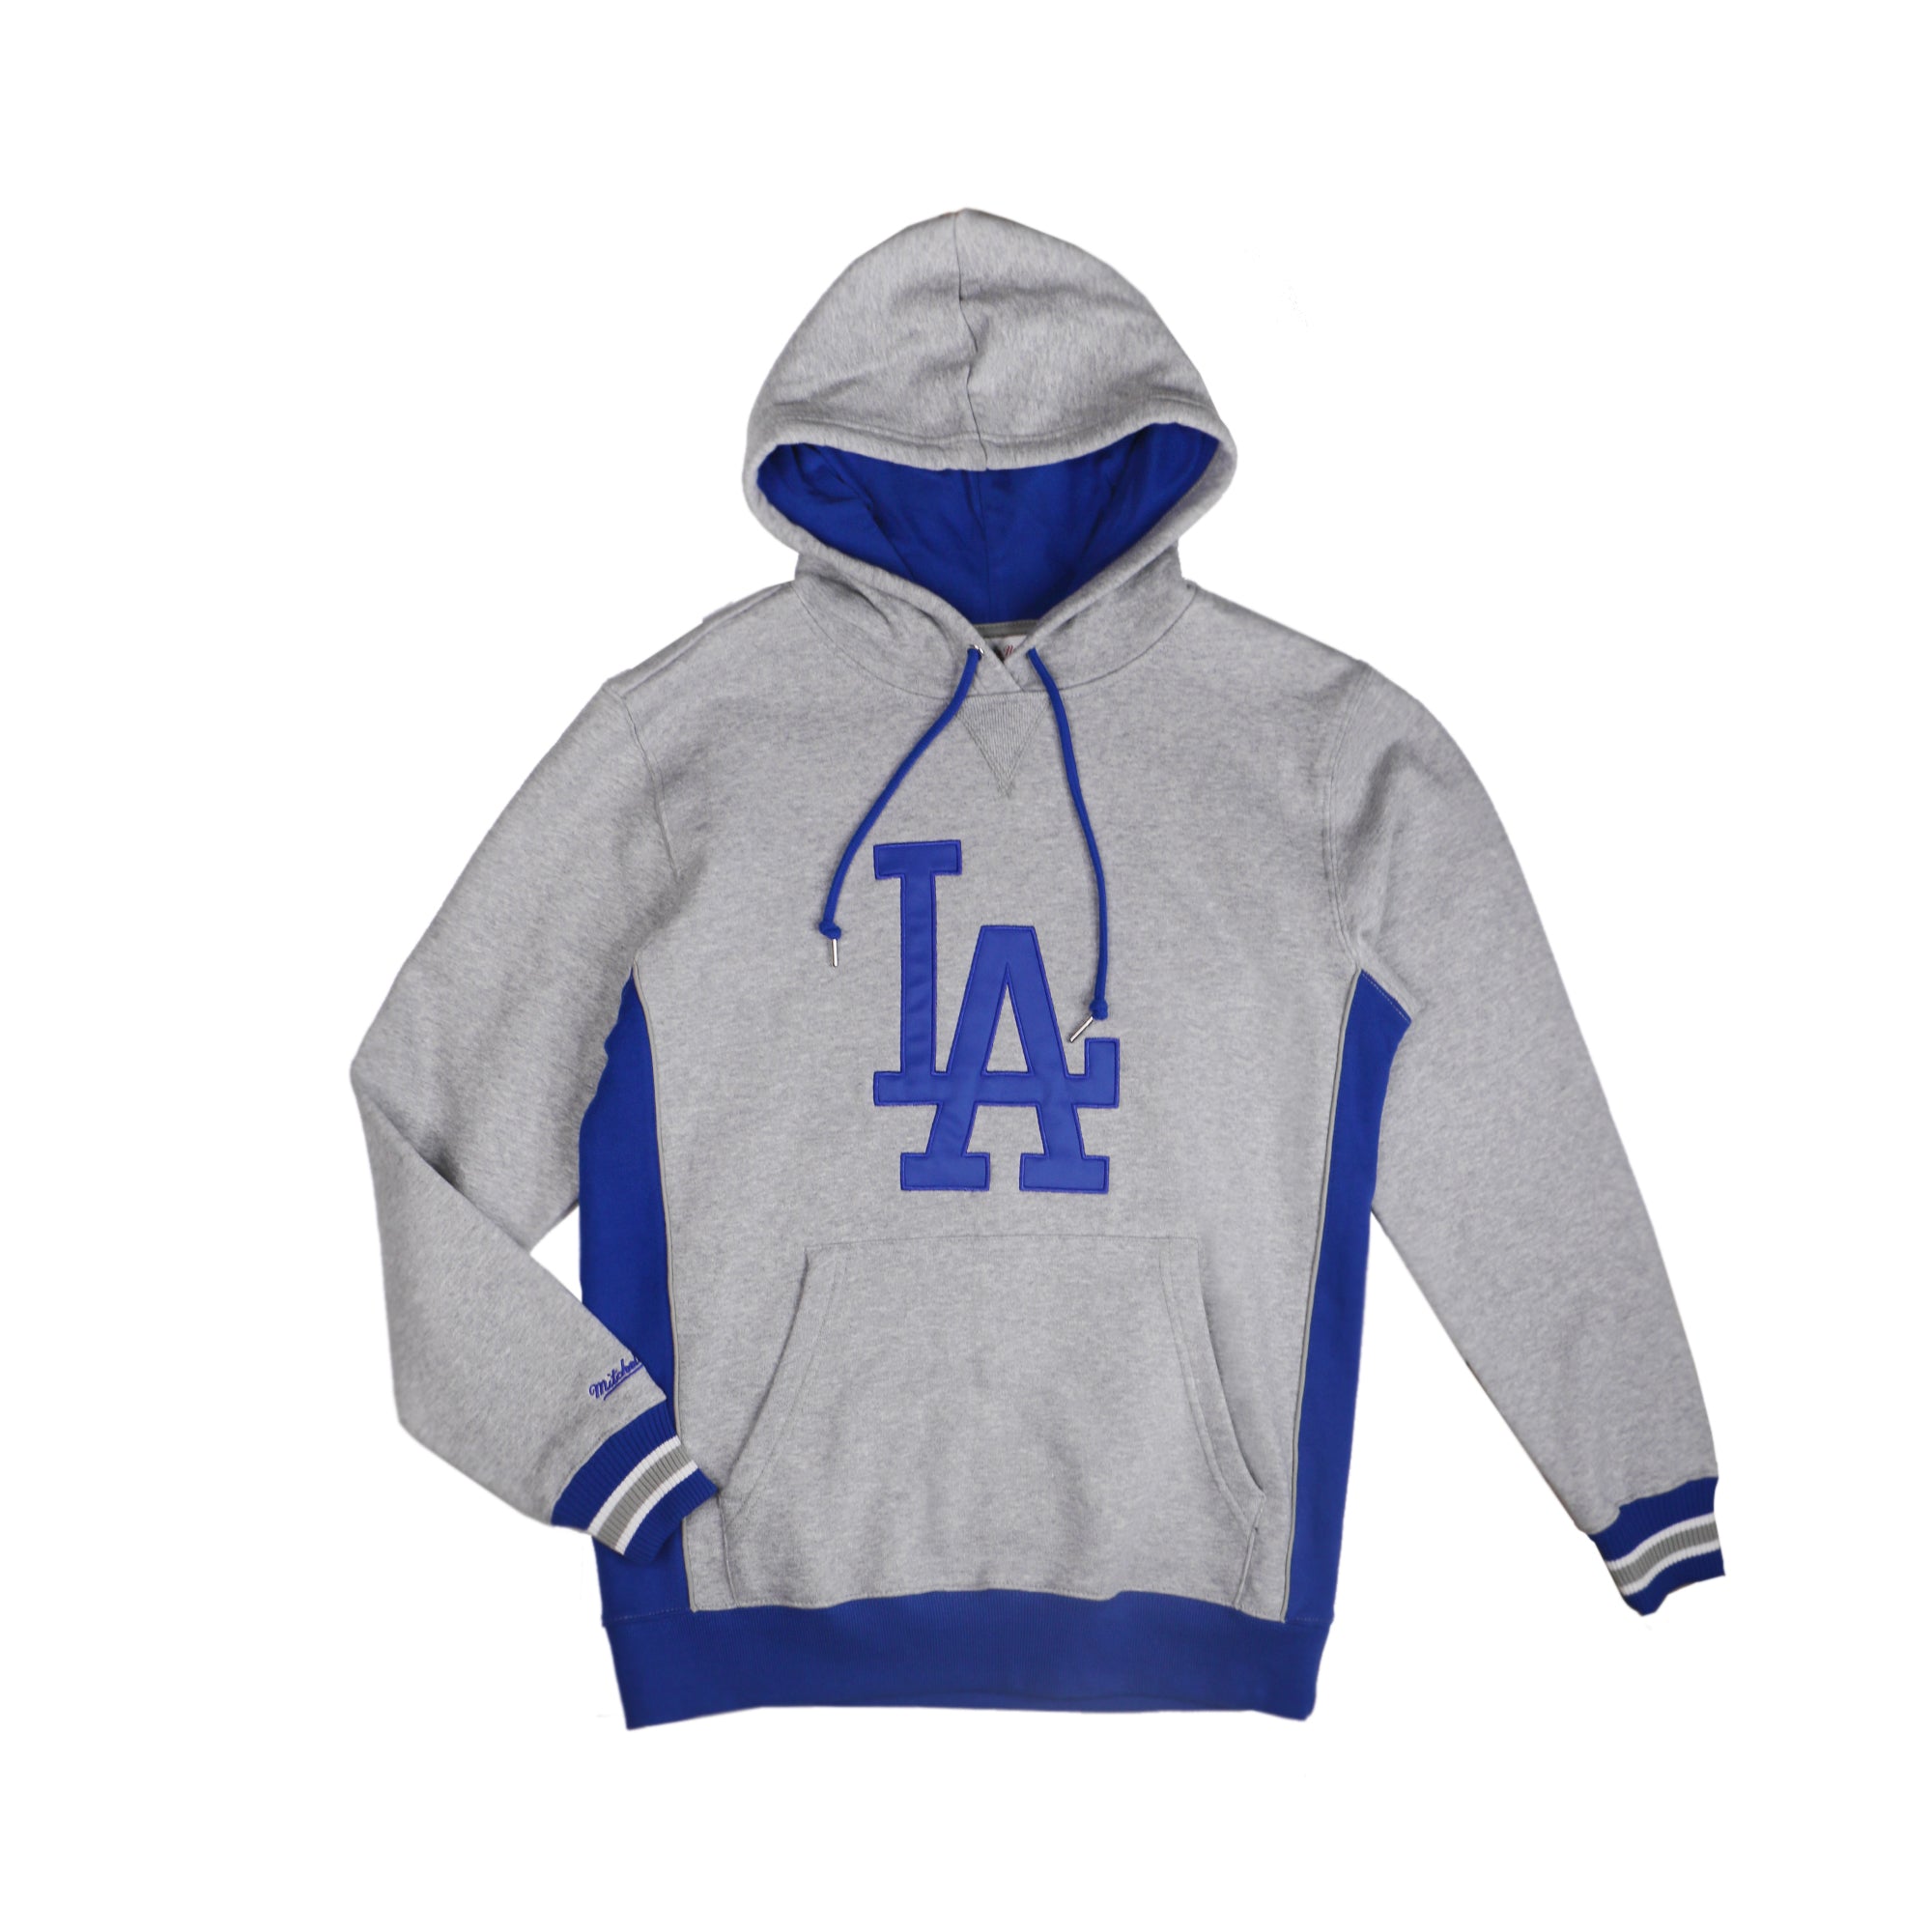 Los Angeles Dodgers Sweater - Dodgers Hoodie New sizes S-3XL